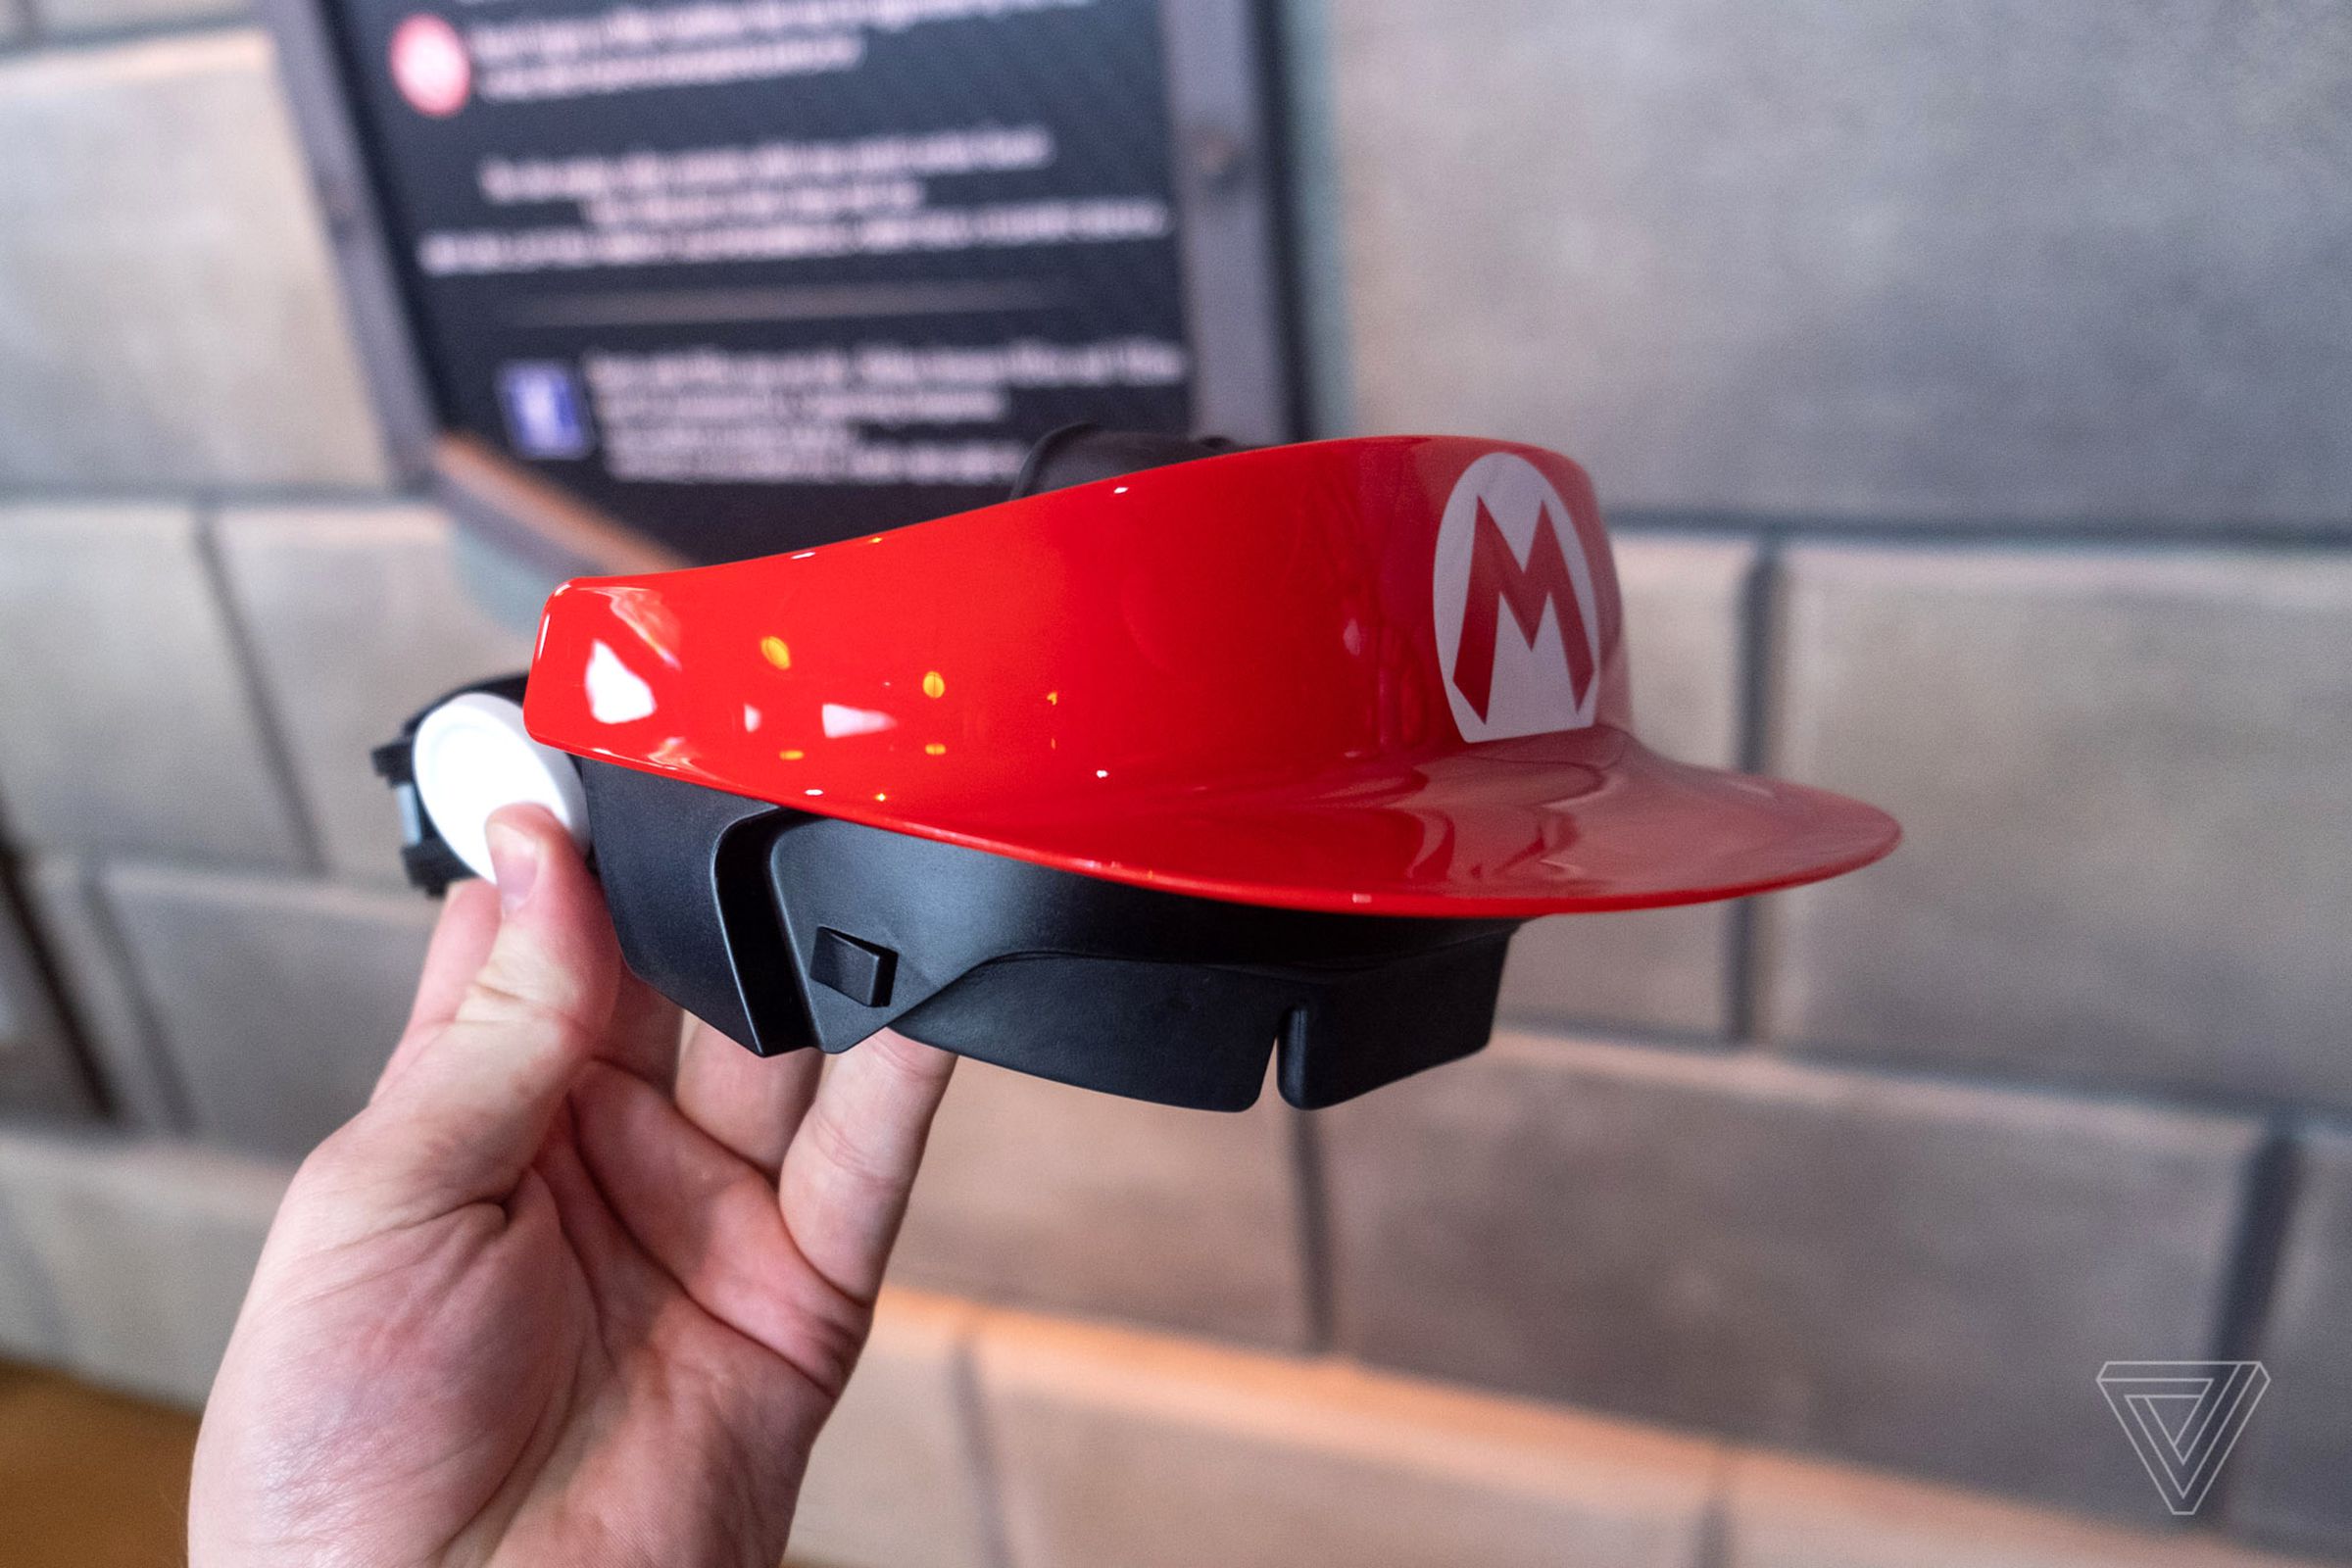 Mira made the headset you wear during the Mario Kart ride at Nintendo World.